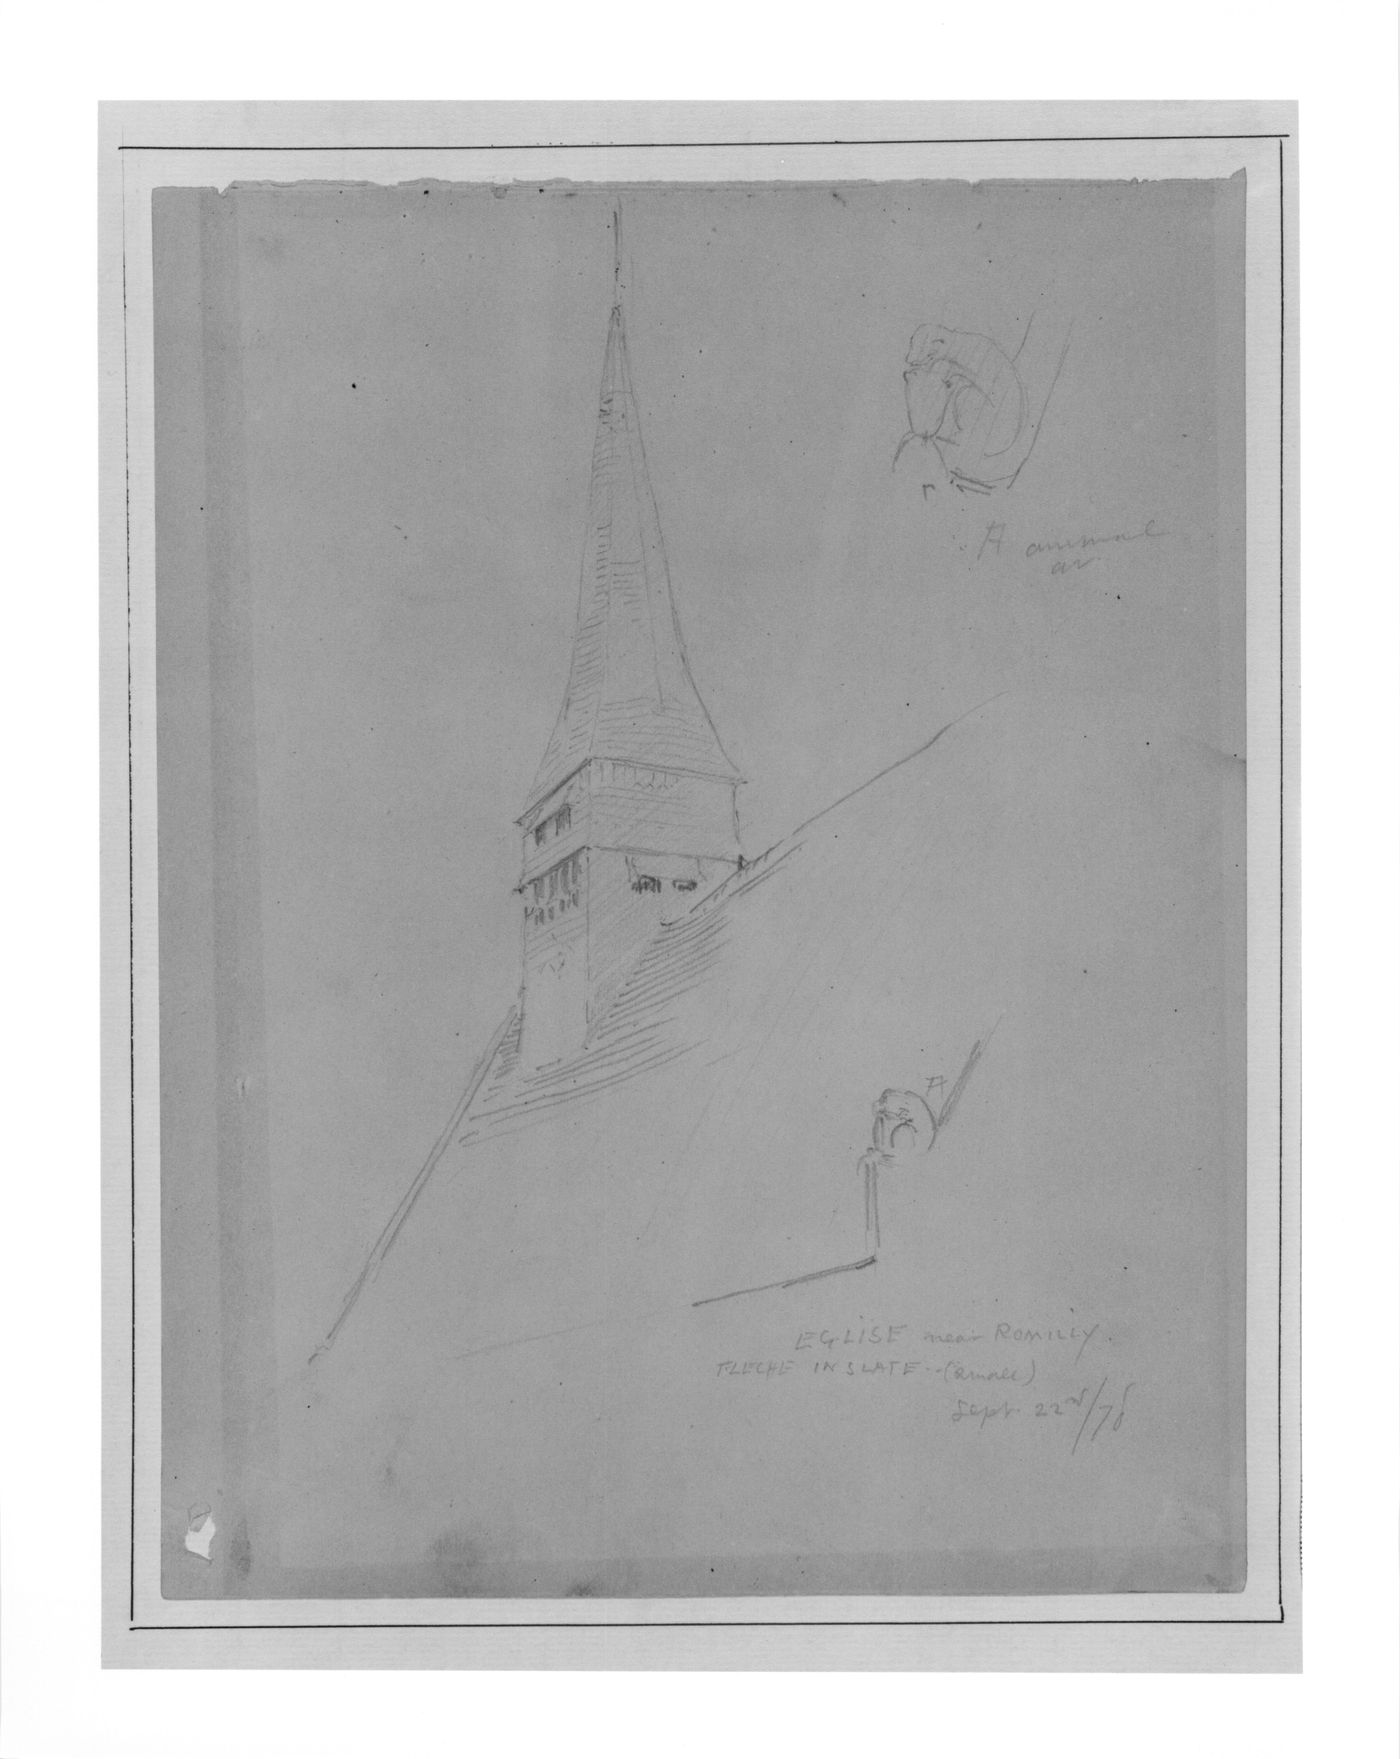 Perspective sketch of the roof and tower of a church near Romilly, France